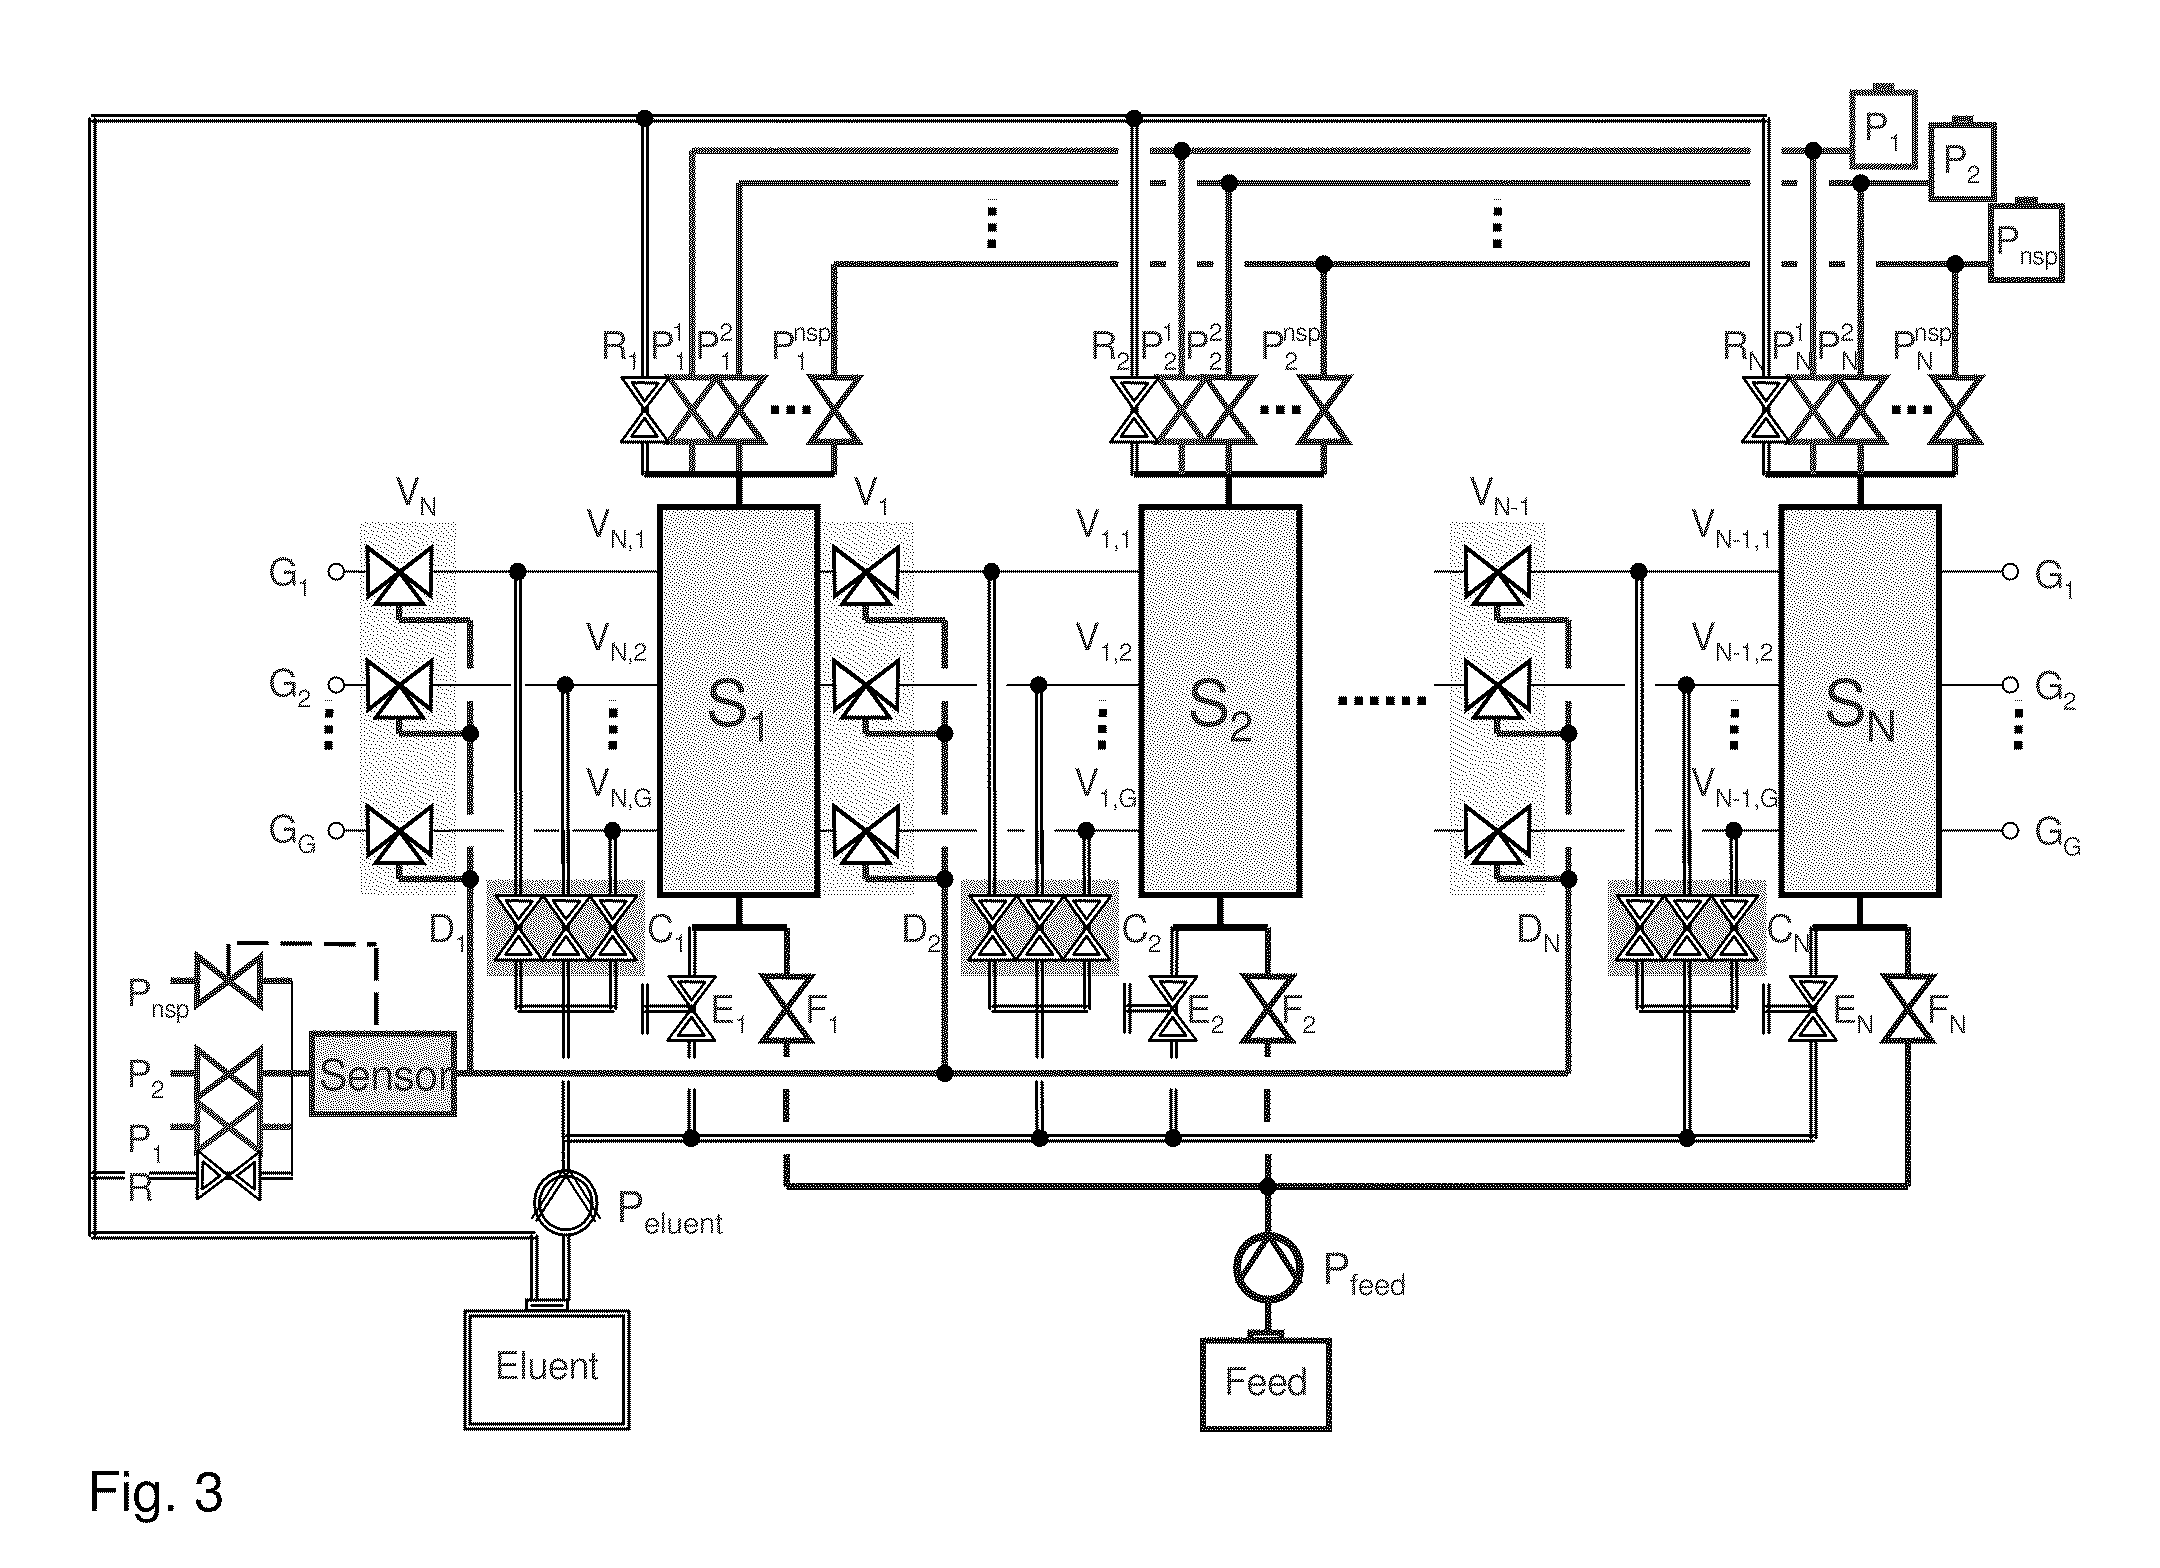 Apparatus for the semi-continuous chromatographic separation of binary and multi-component mixtures